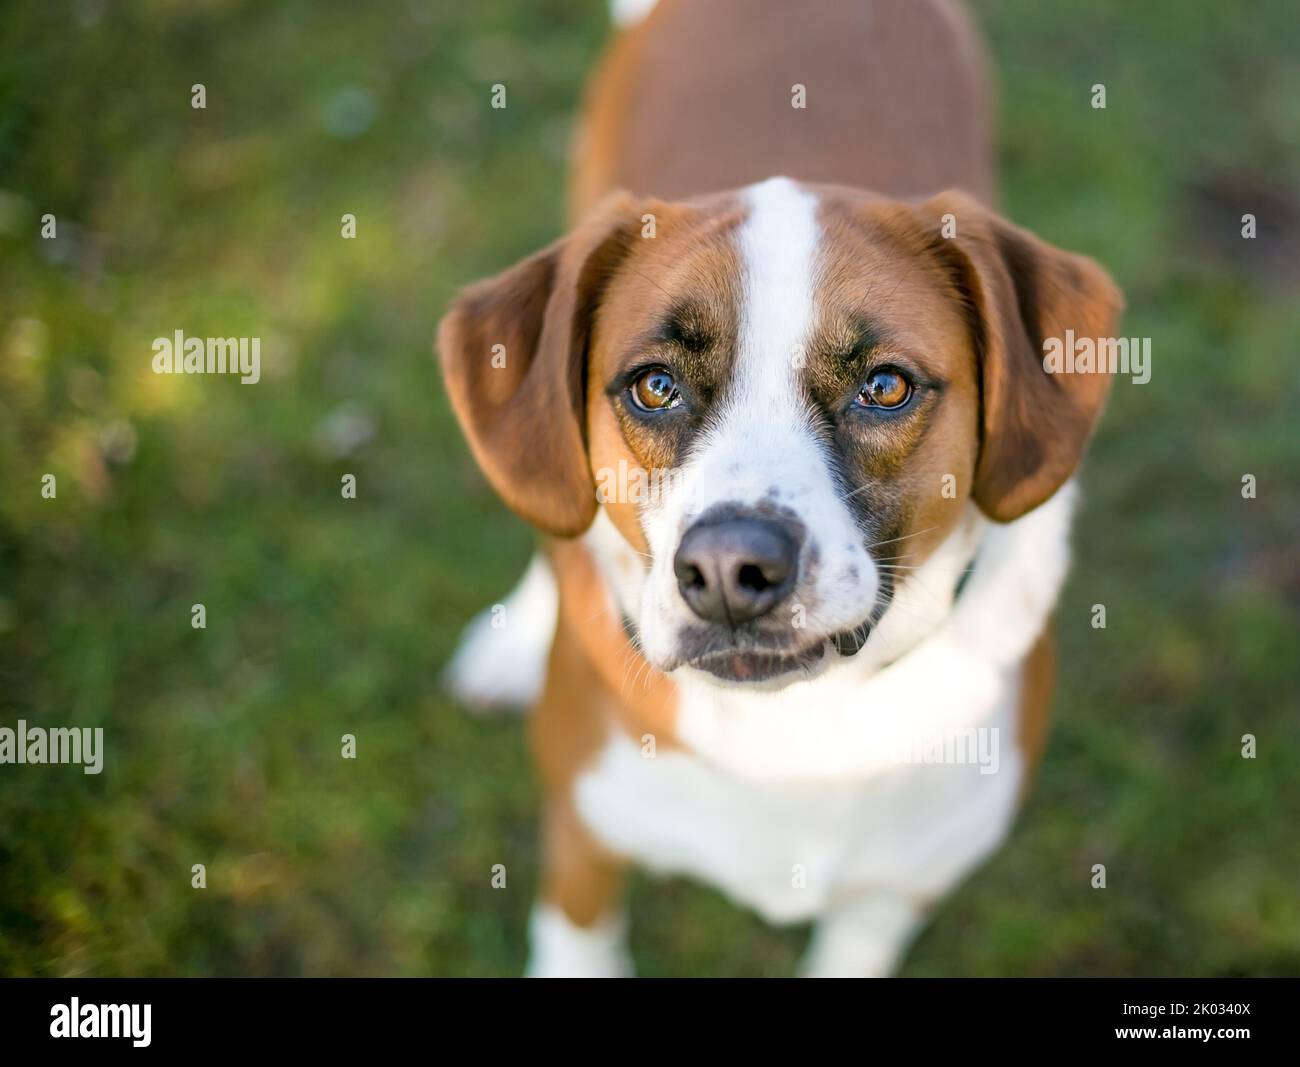 A brown and white Beagle mixed breed dog looking up at the camera Stock Photo